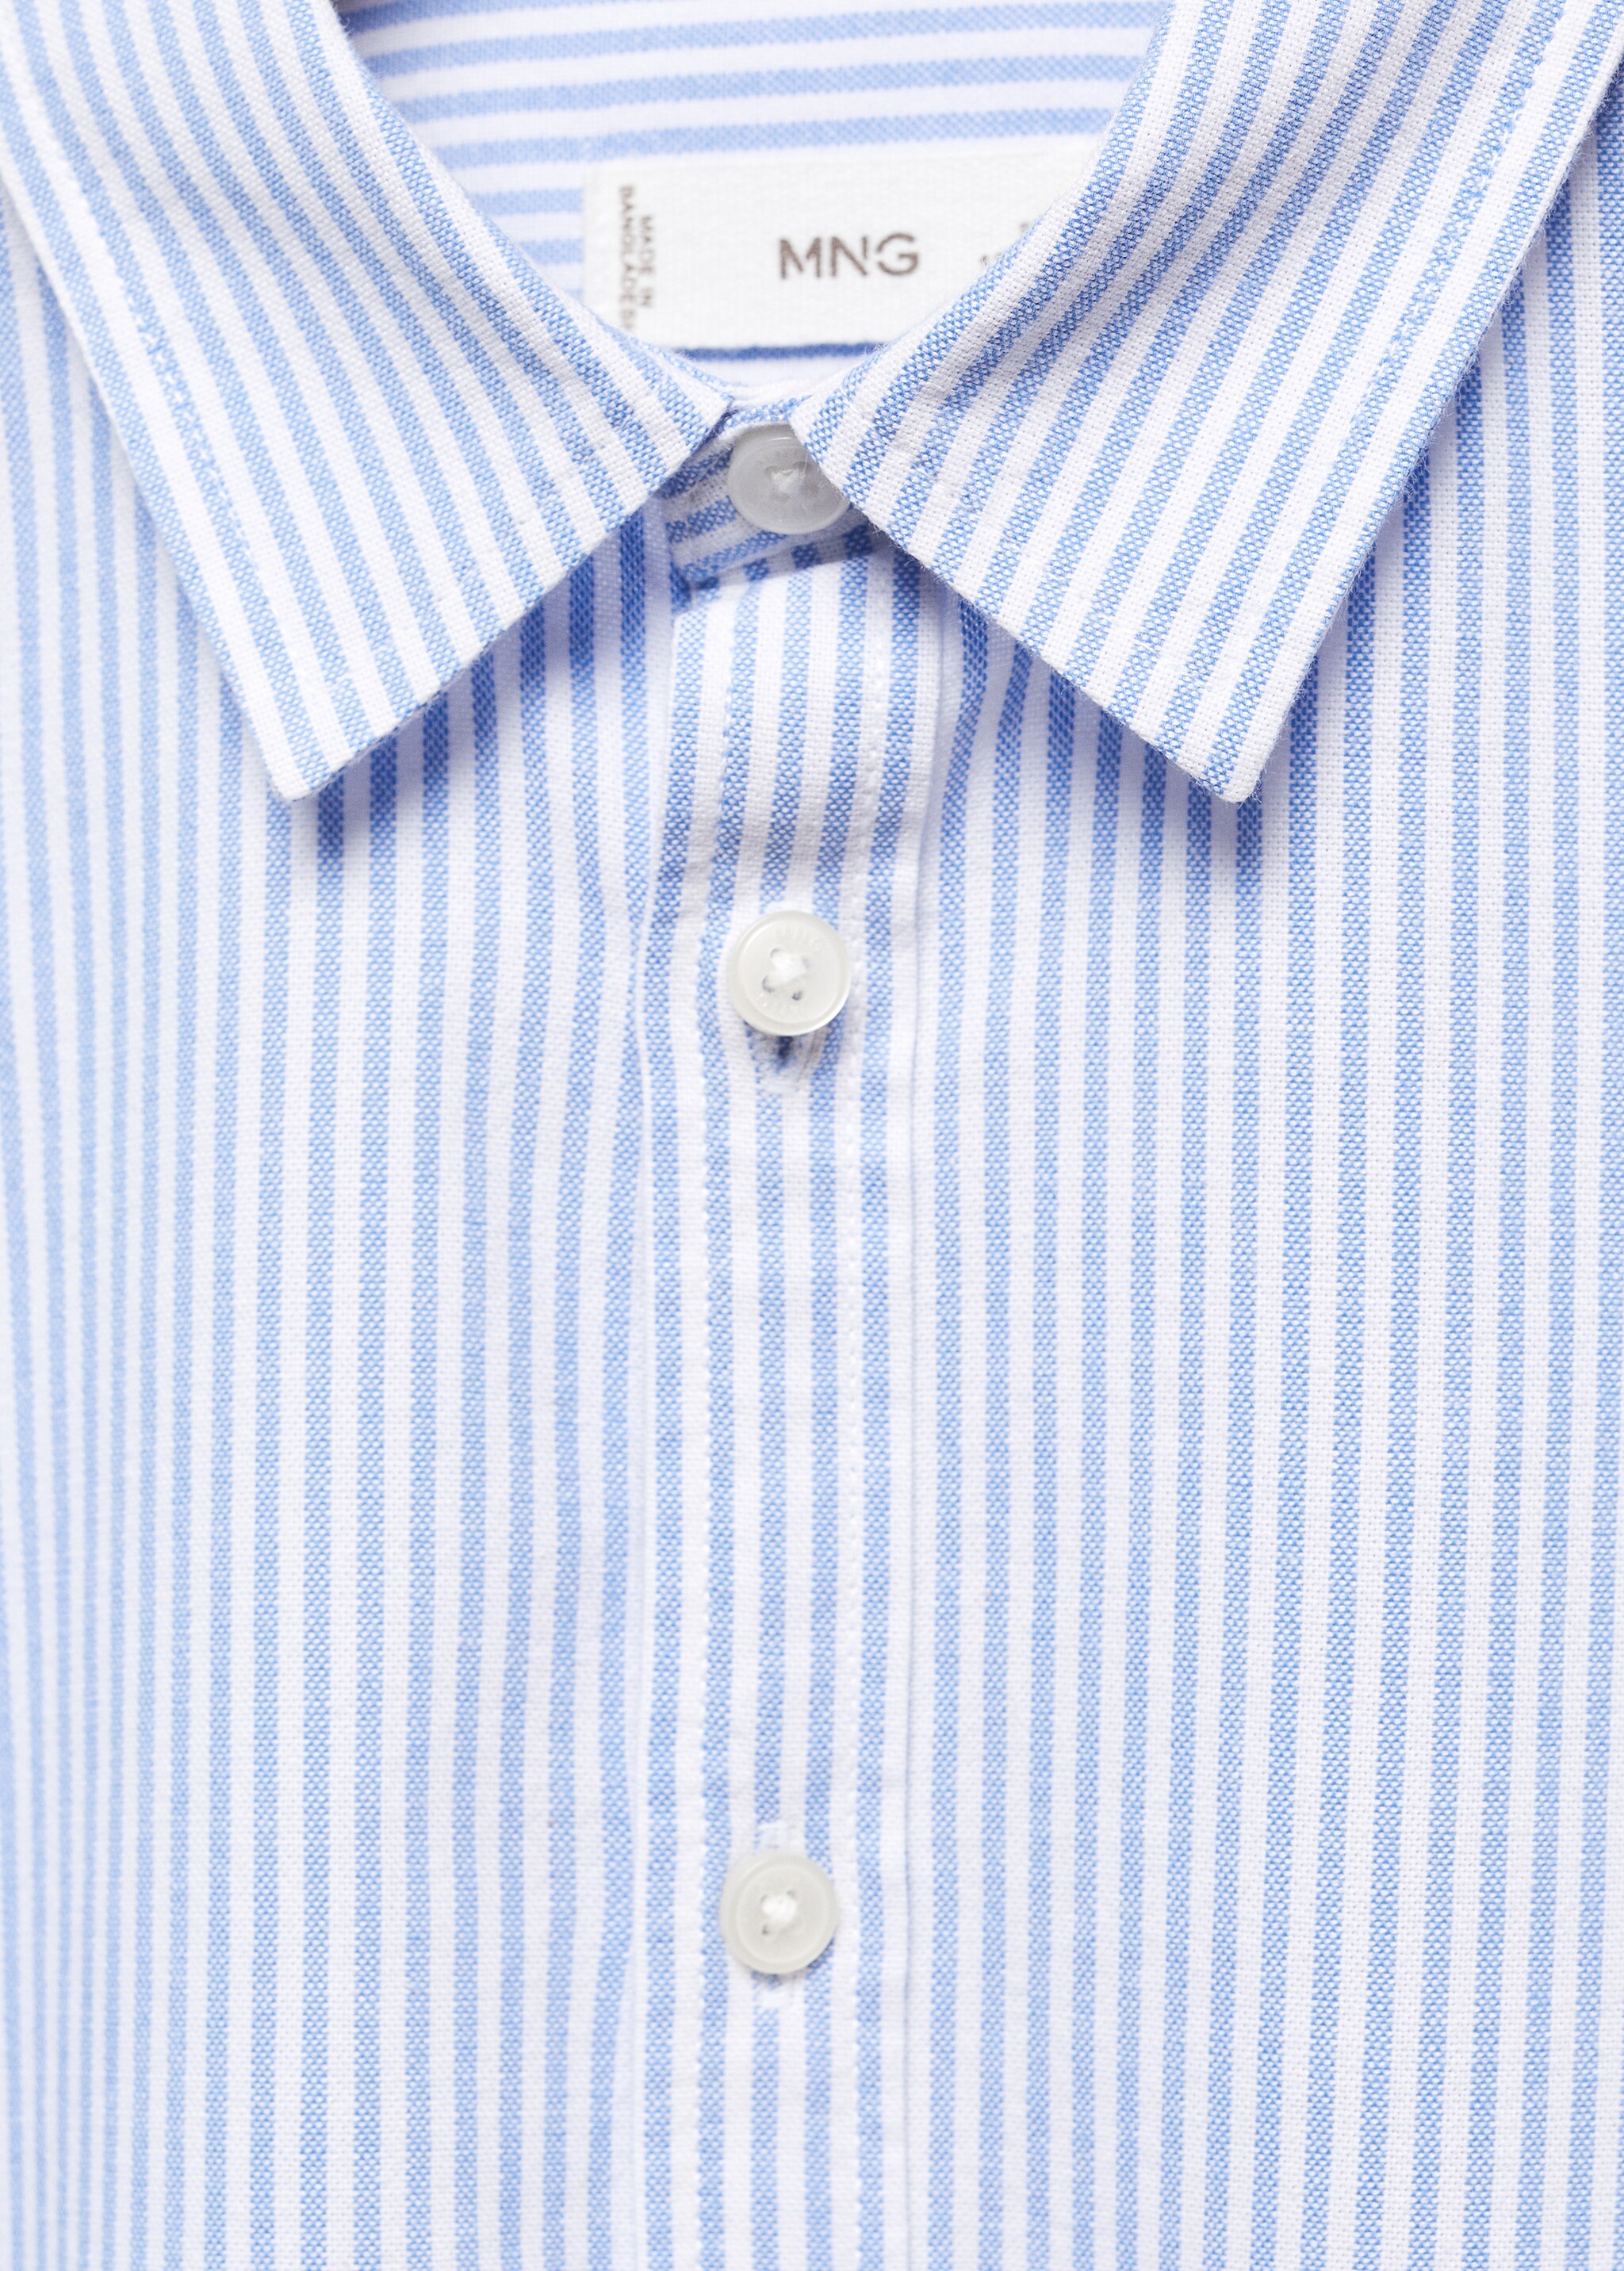 Striped Oxford shirt - Details of the article 8